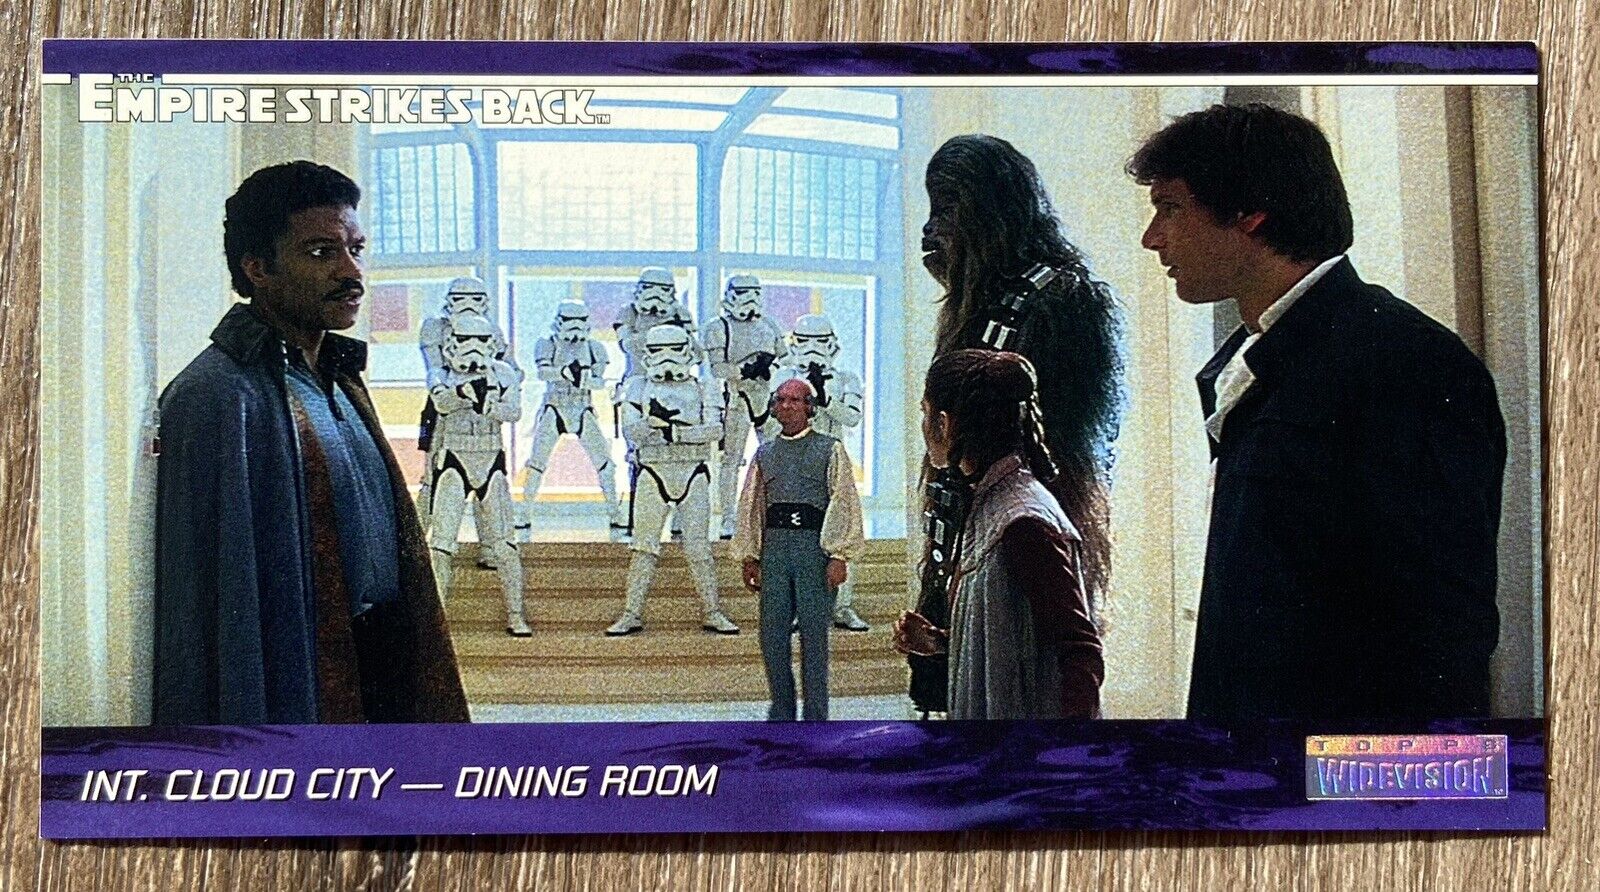 1995 Topps Widevision Empire Strikes Back-Int. Cloud City-Dining Room #96